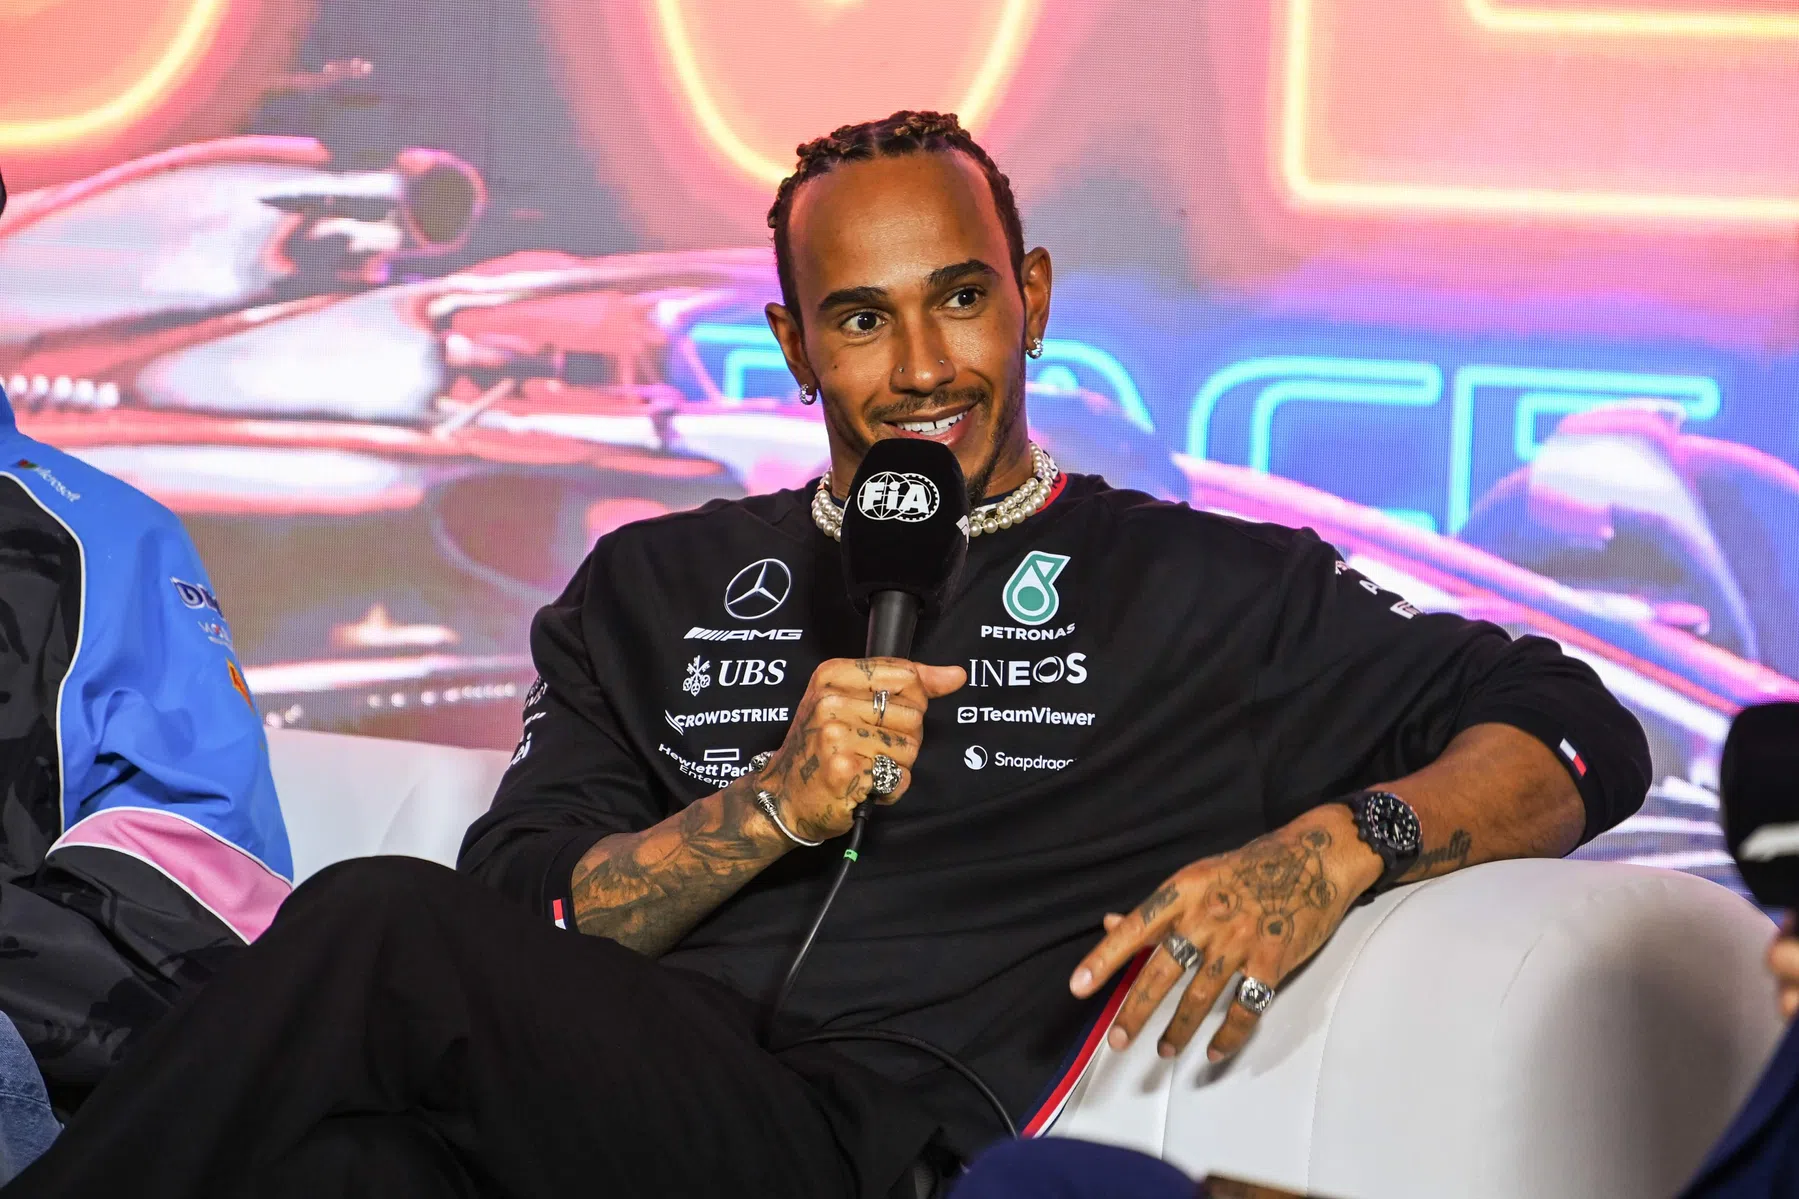 Lewis hamilton on the problems at mercedes